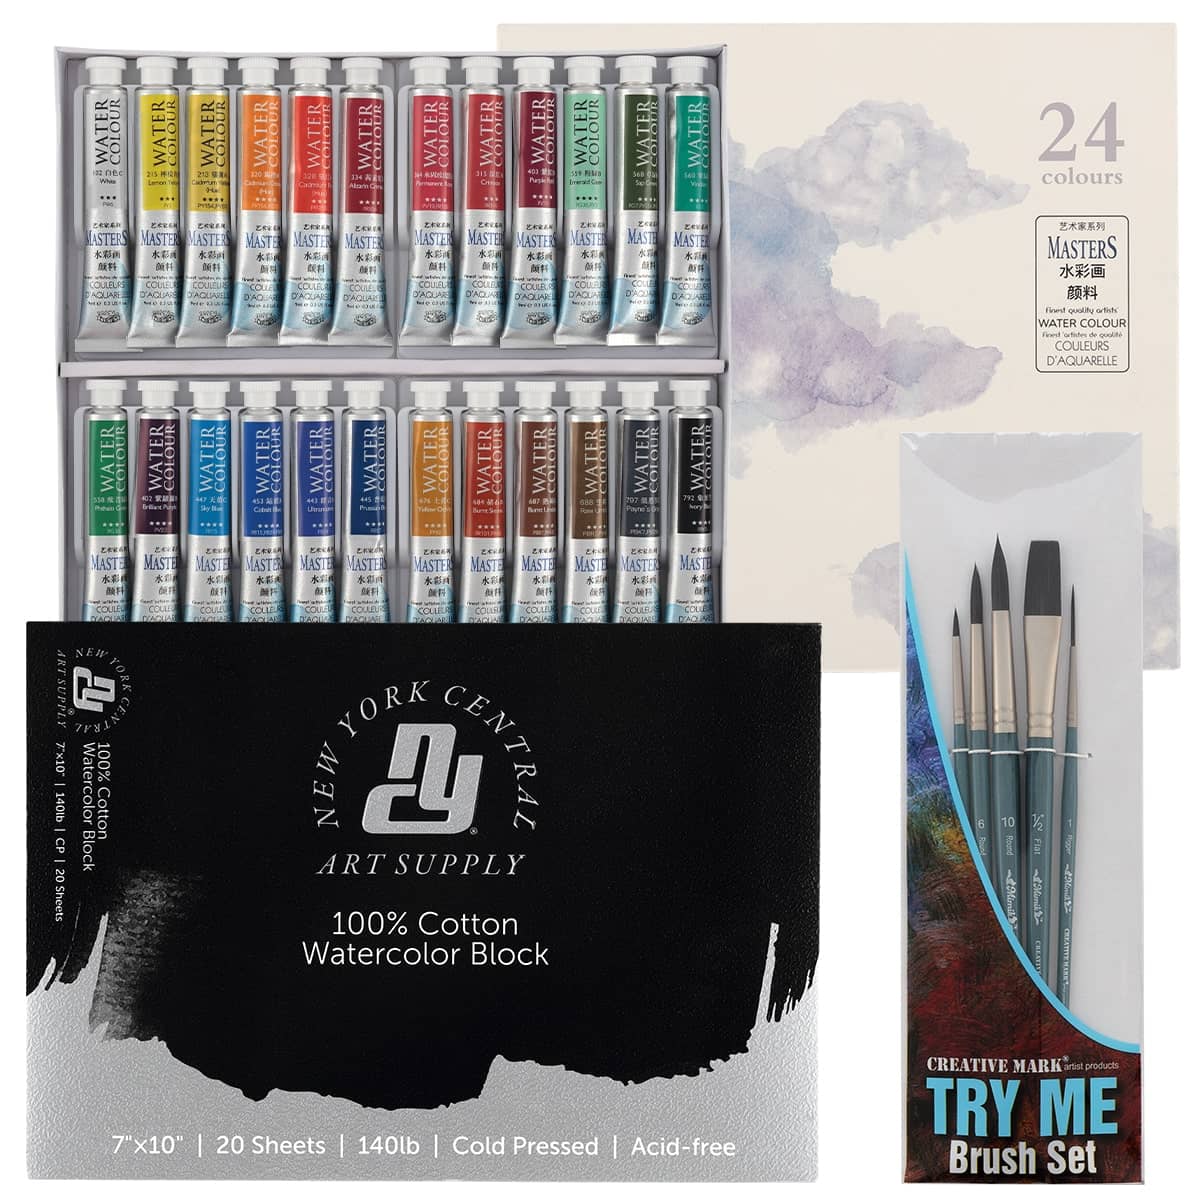 Marie's Master Quality Watercolor Set